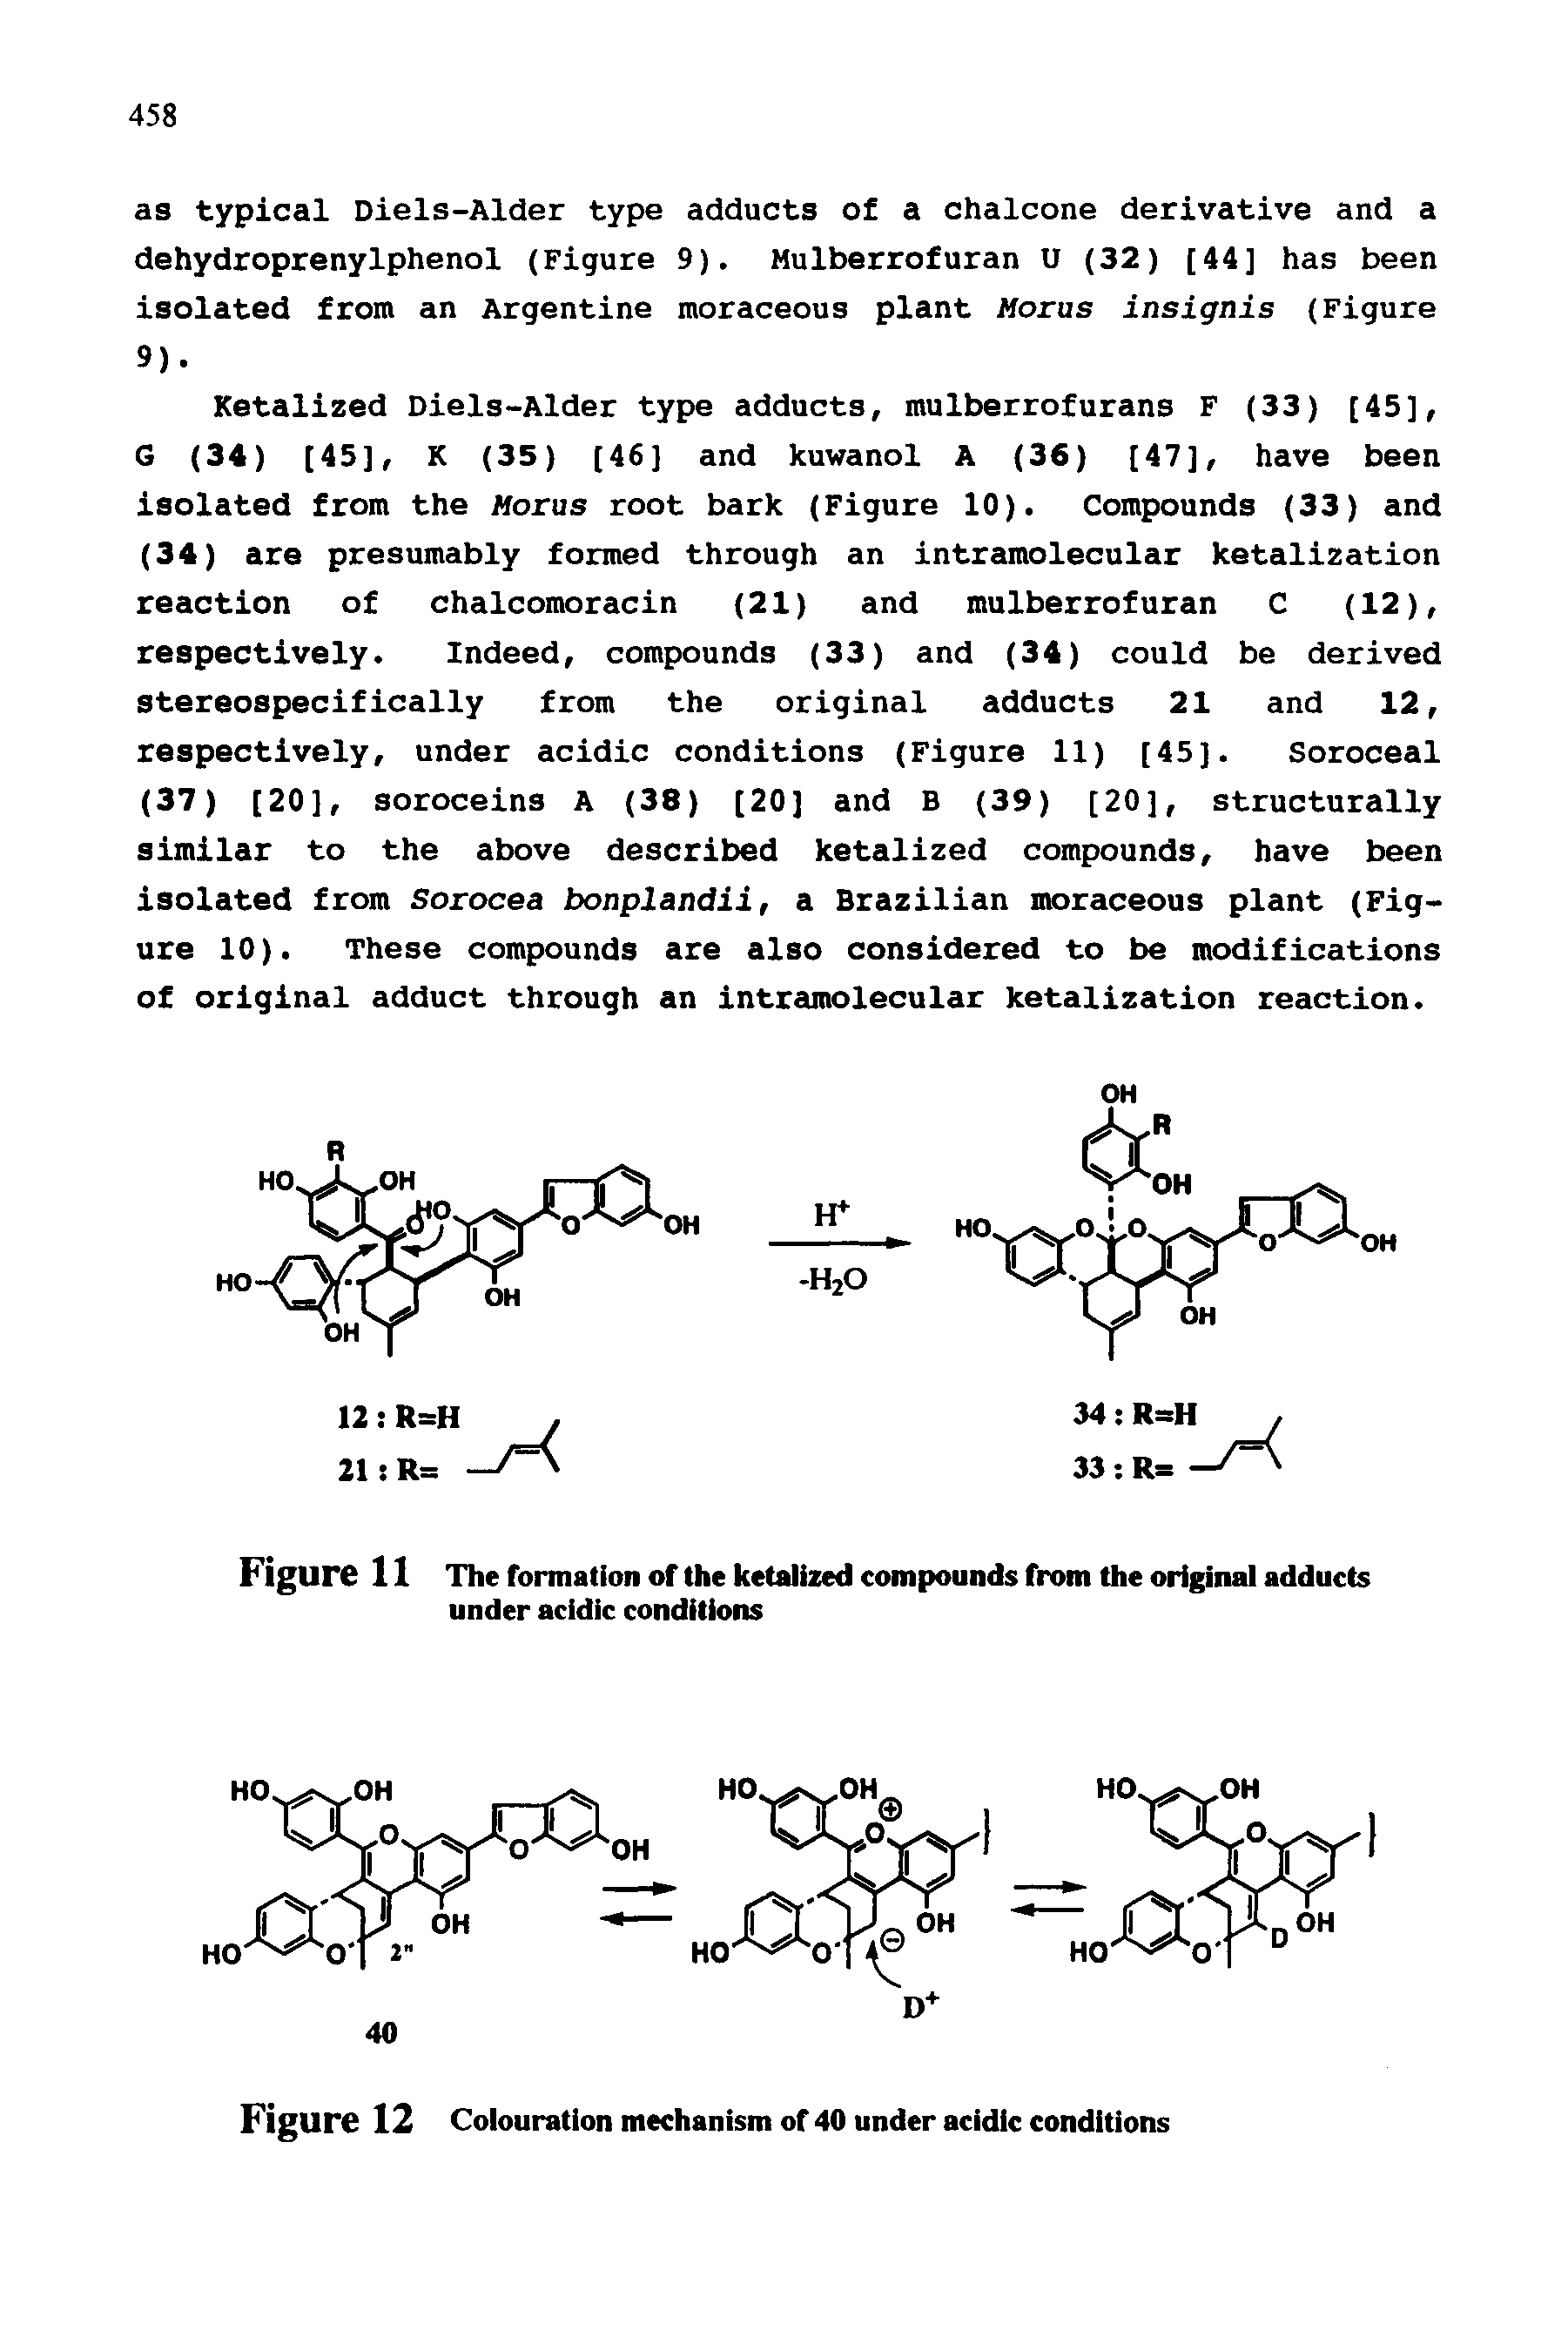 Figure 11 The formation of the ketalized compounds from the original adducts under acidic conditions...